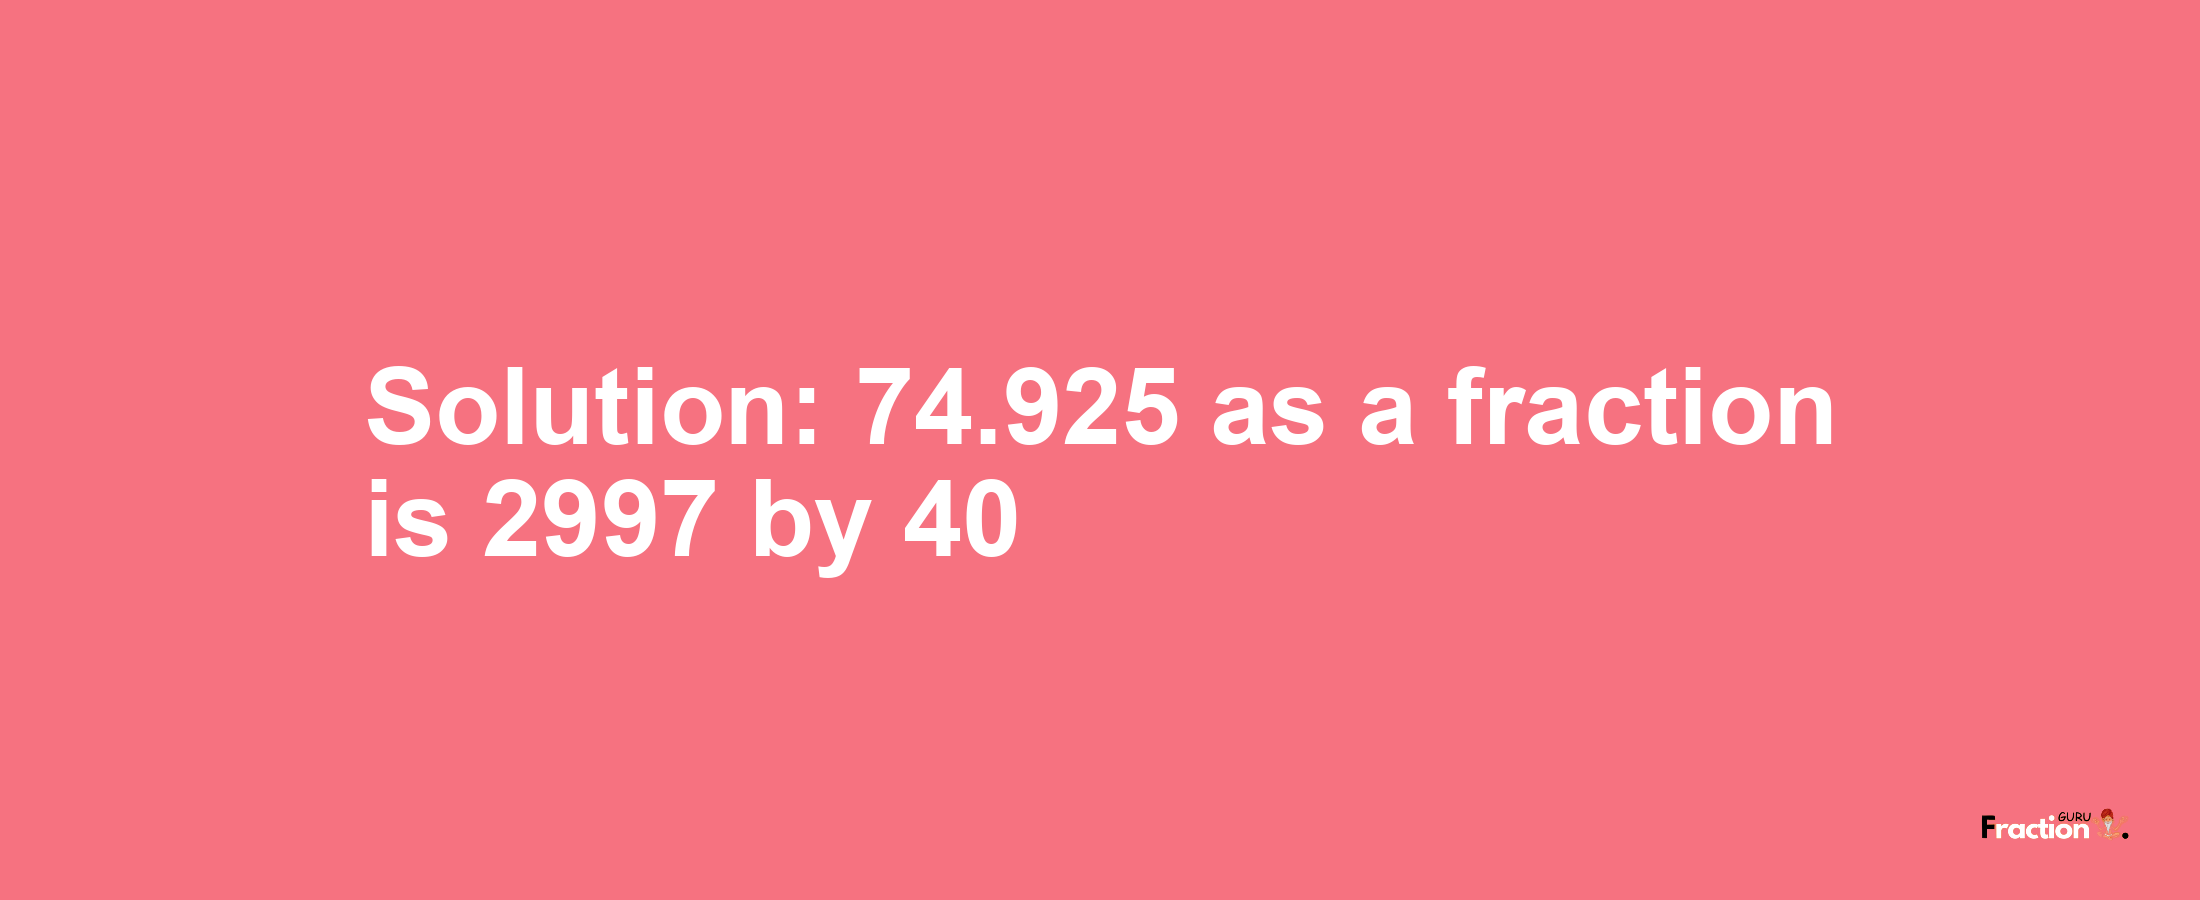 Solution:74.925 as a fraction is 2997/40